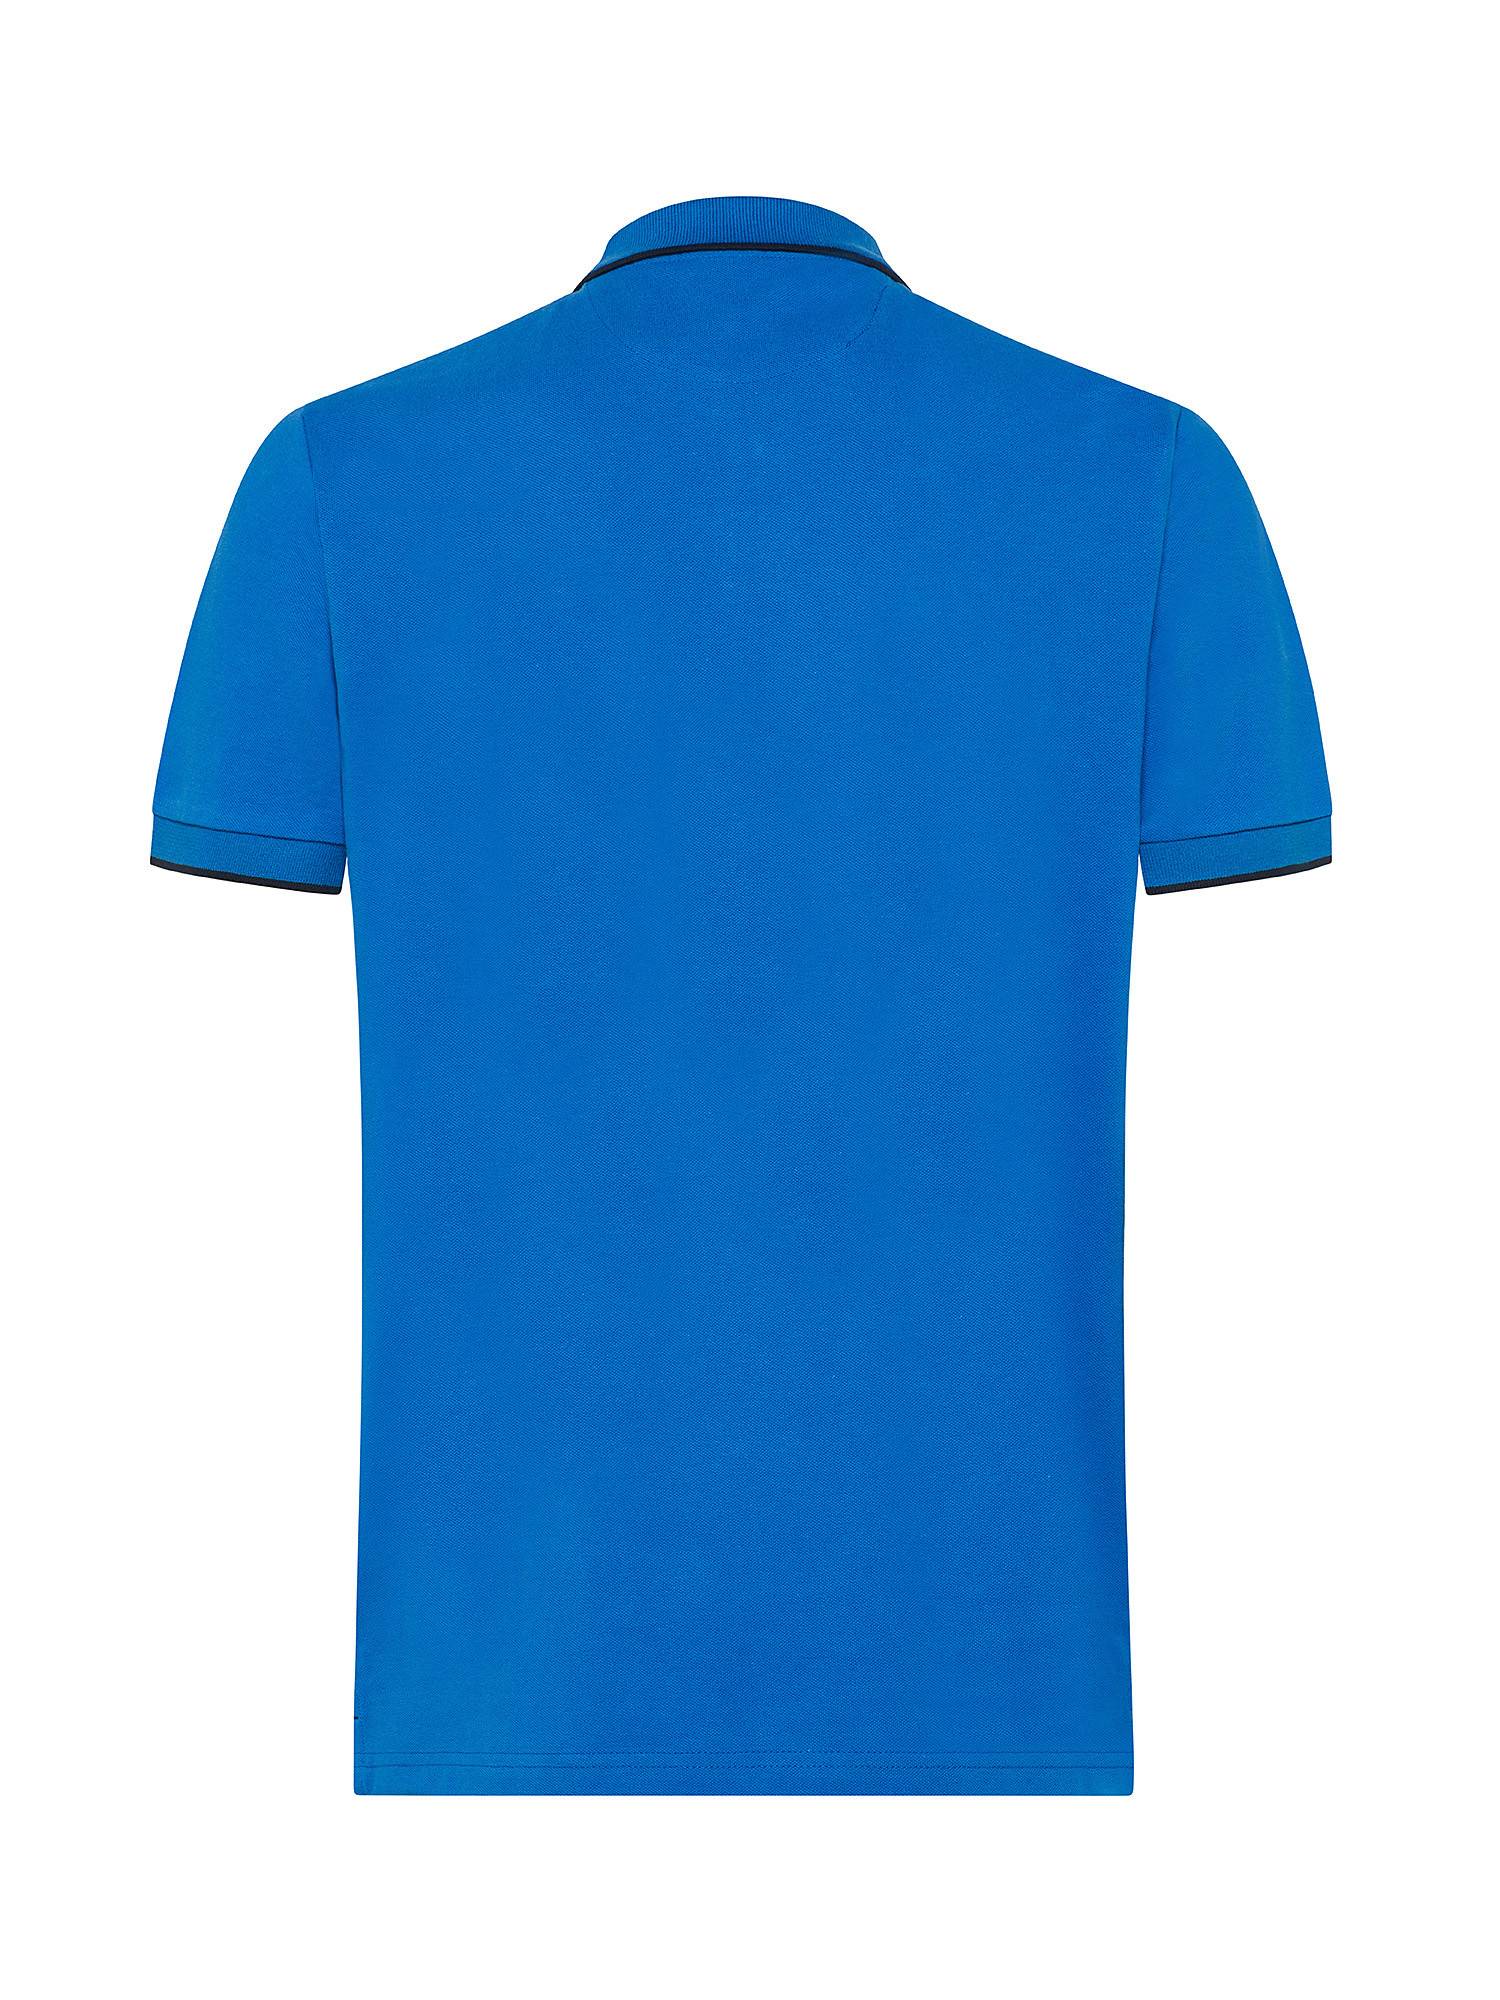 North Sails - Organic cotton piqué polo shirt with micrologo, Electric Blue, large image number 1